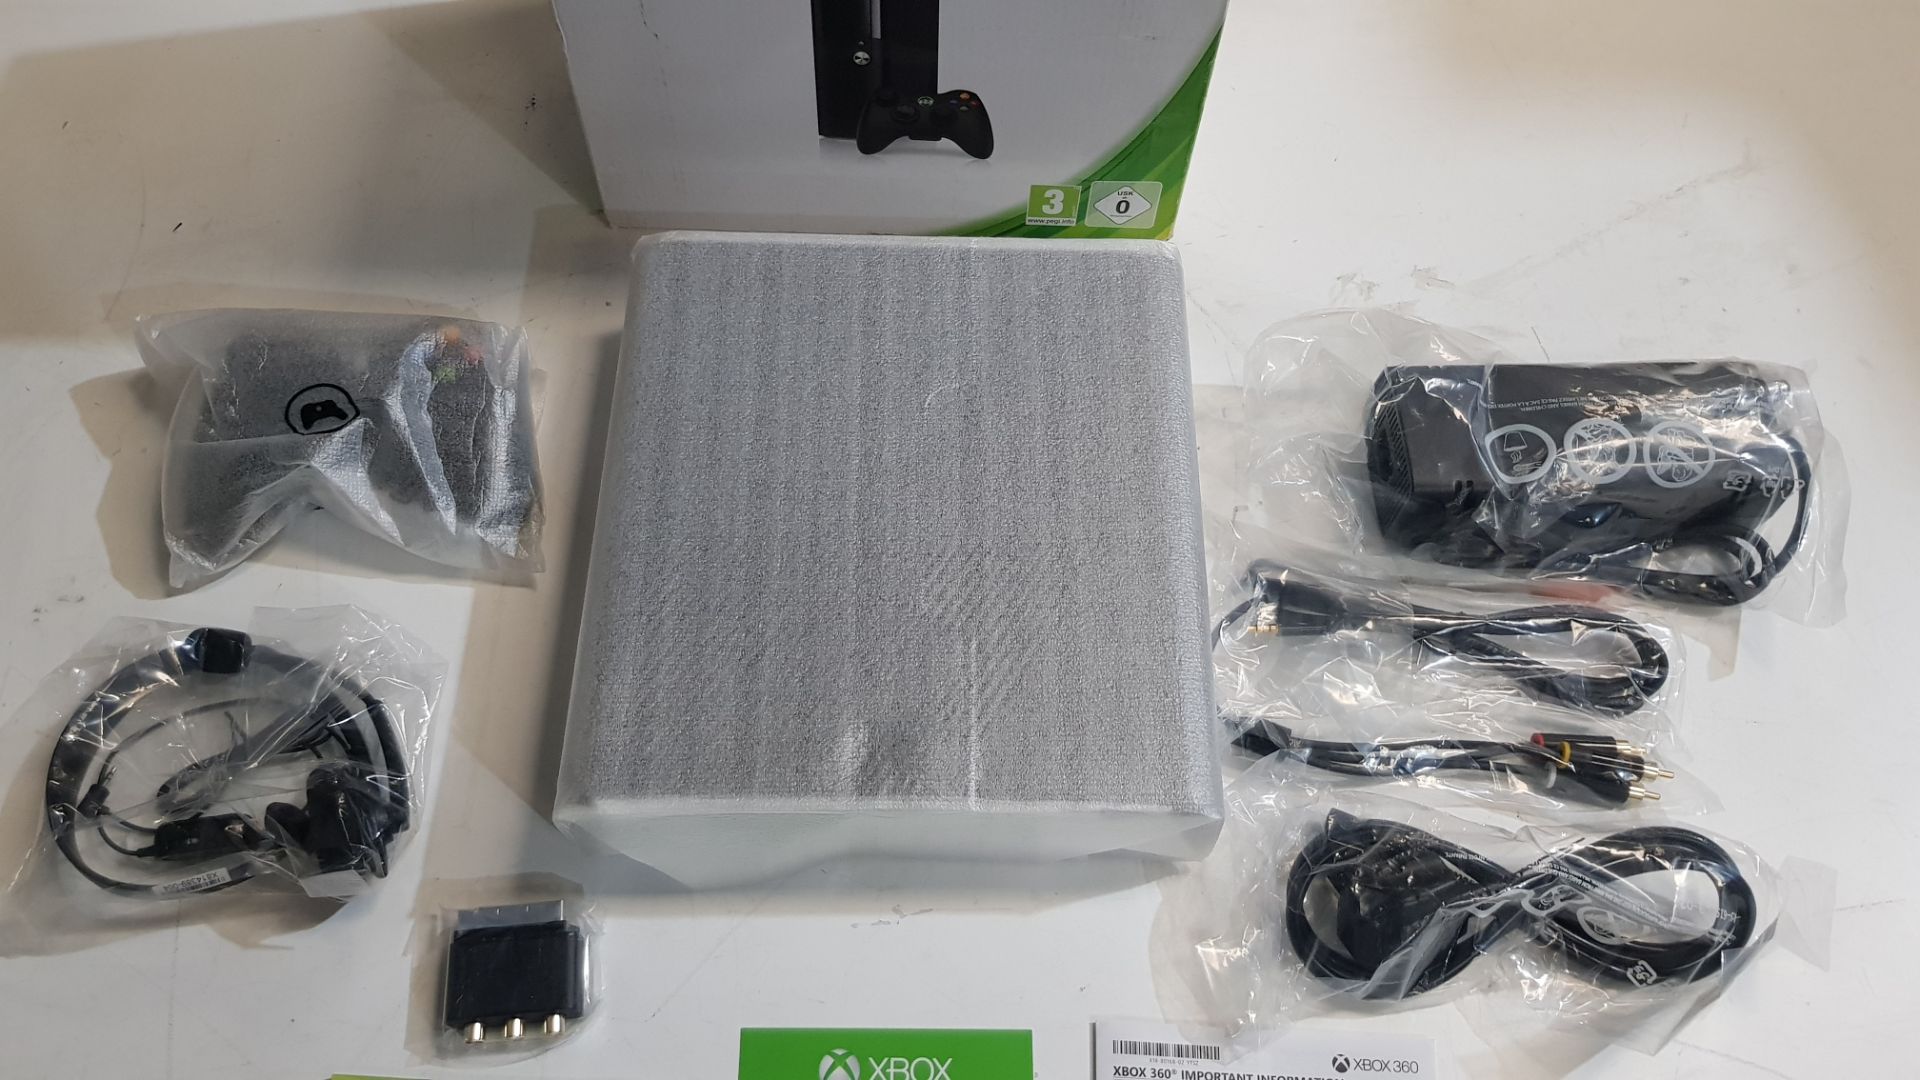 1x Xbox 360 250GB Go. New, Sealed Unit. Opened For Contents Photograph. - Image 8 of 8